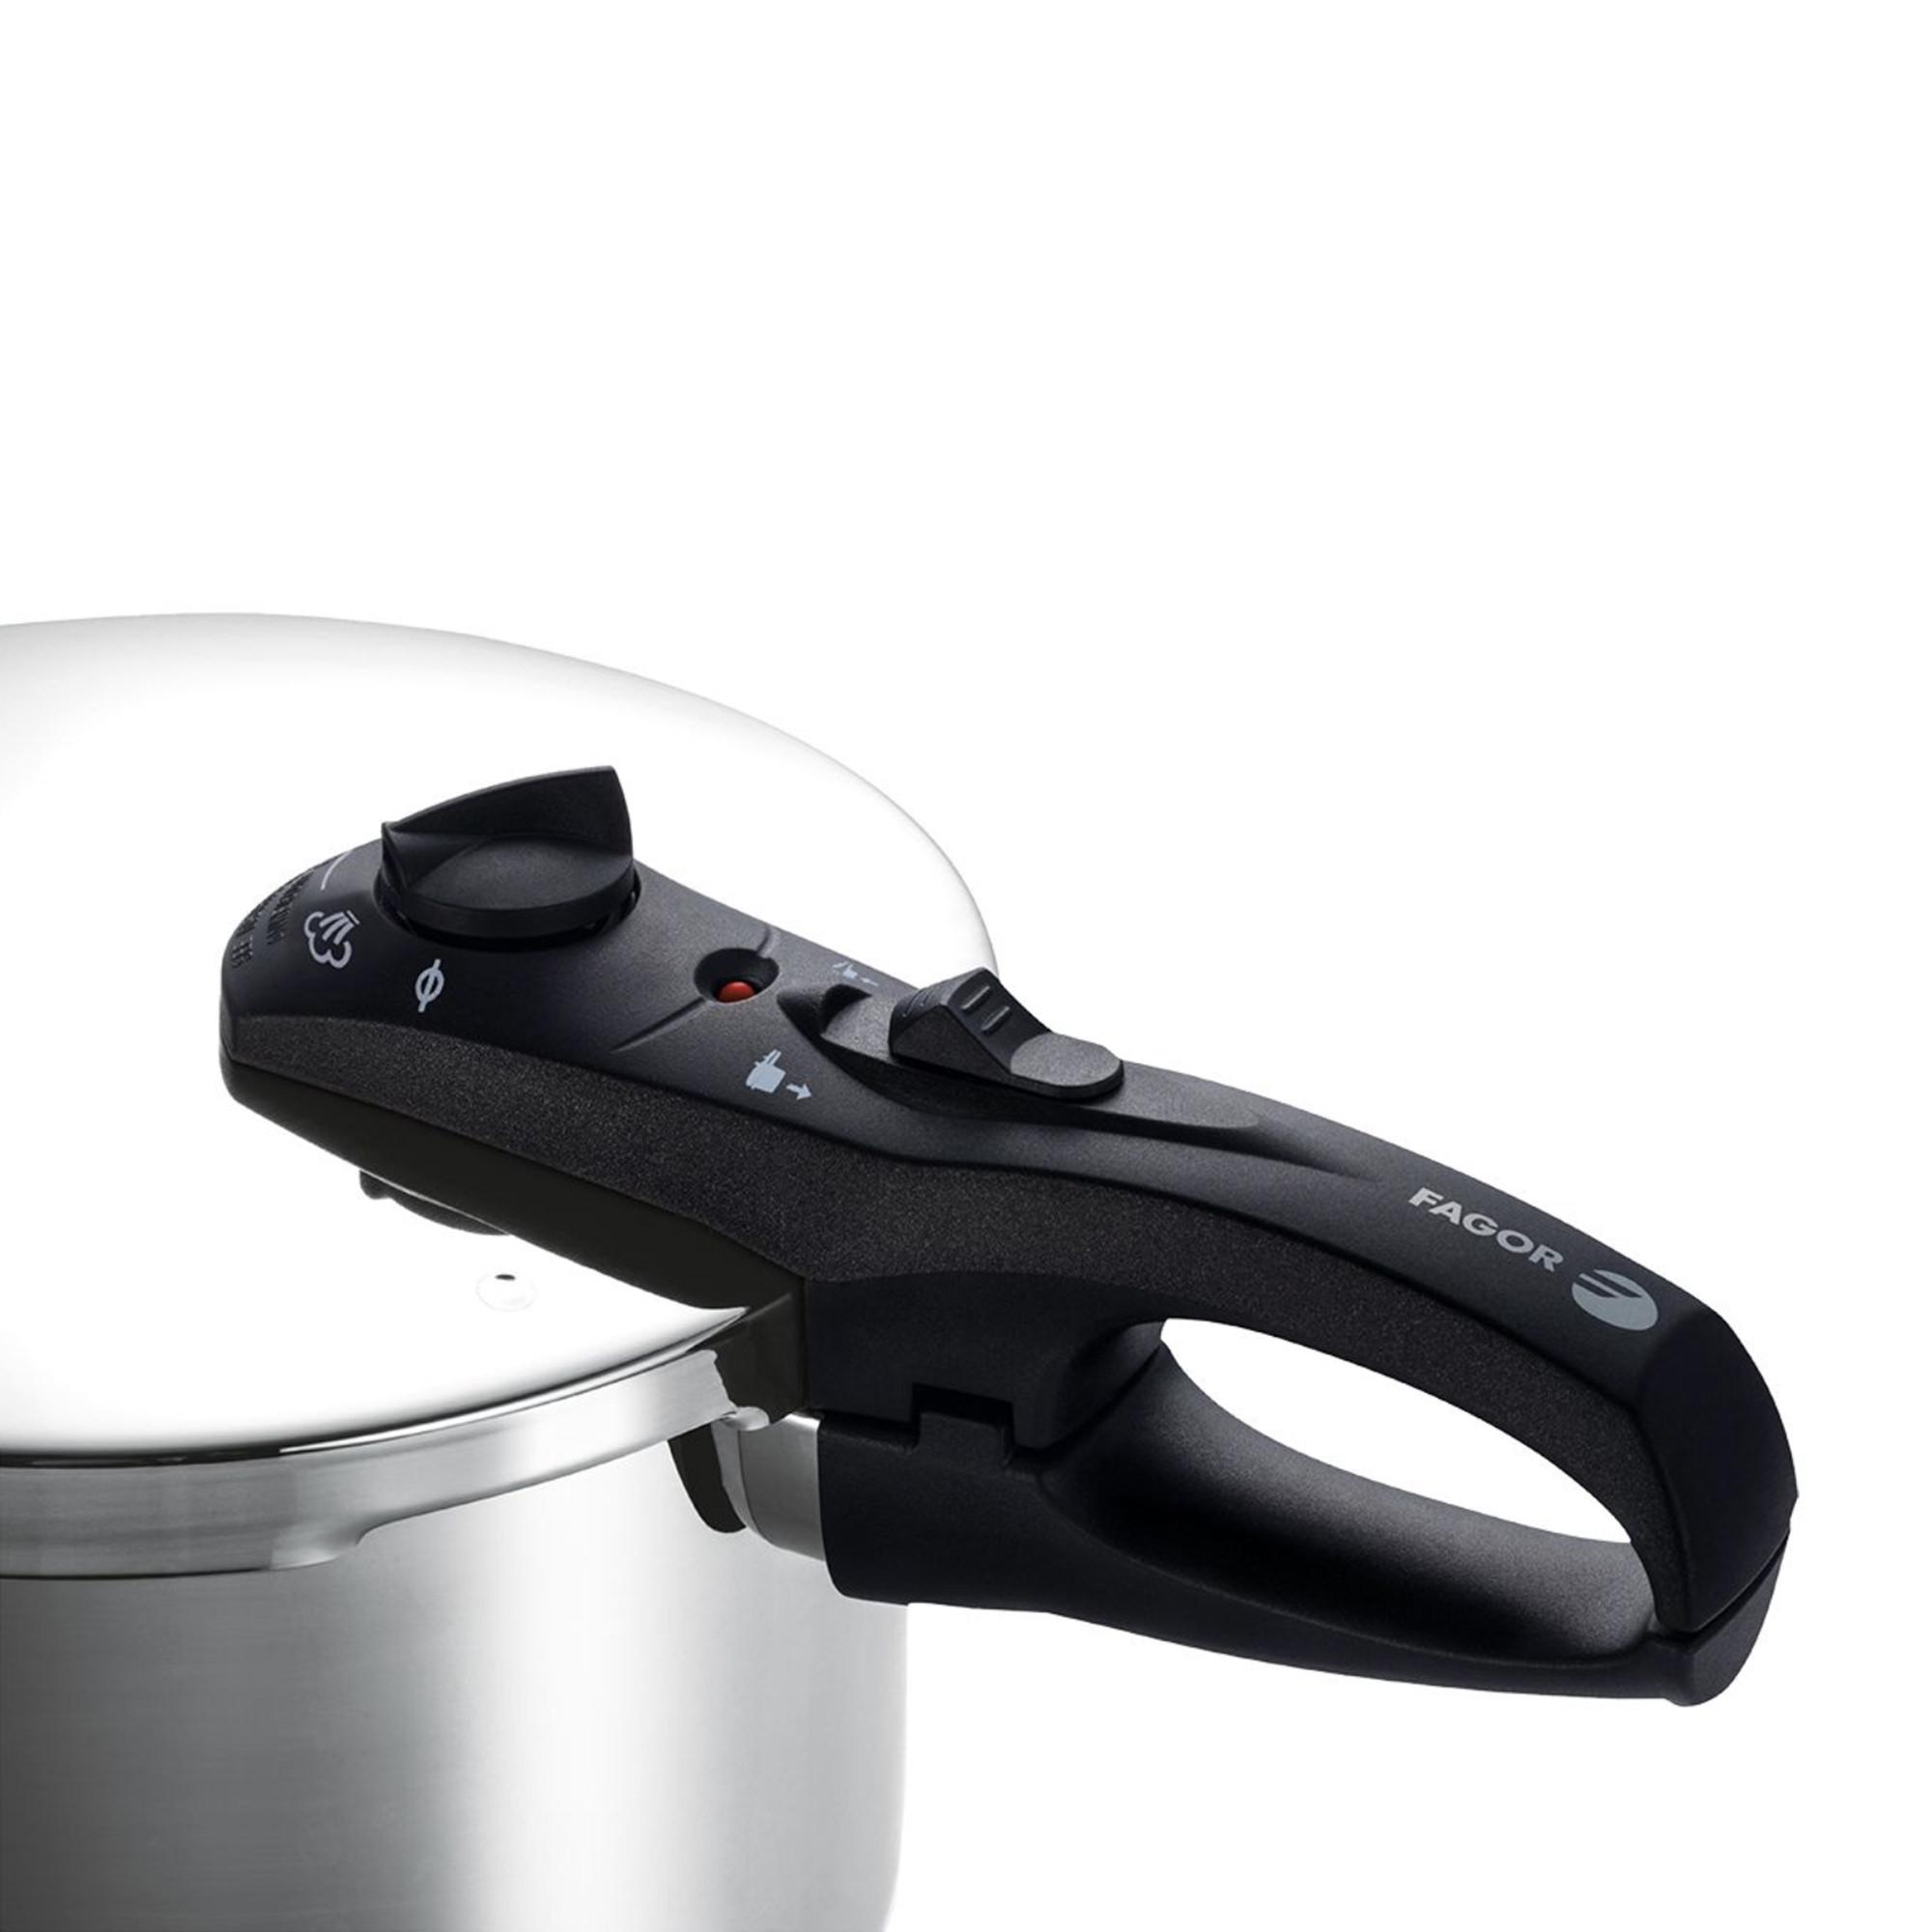 Fagor Duo Stainless Steel Pressure Cooker 4L Image 3